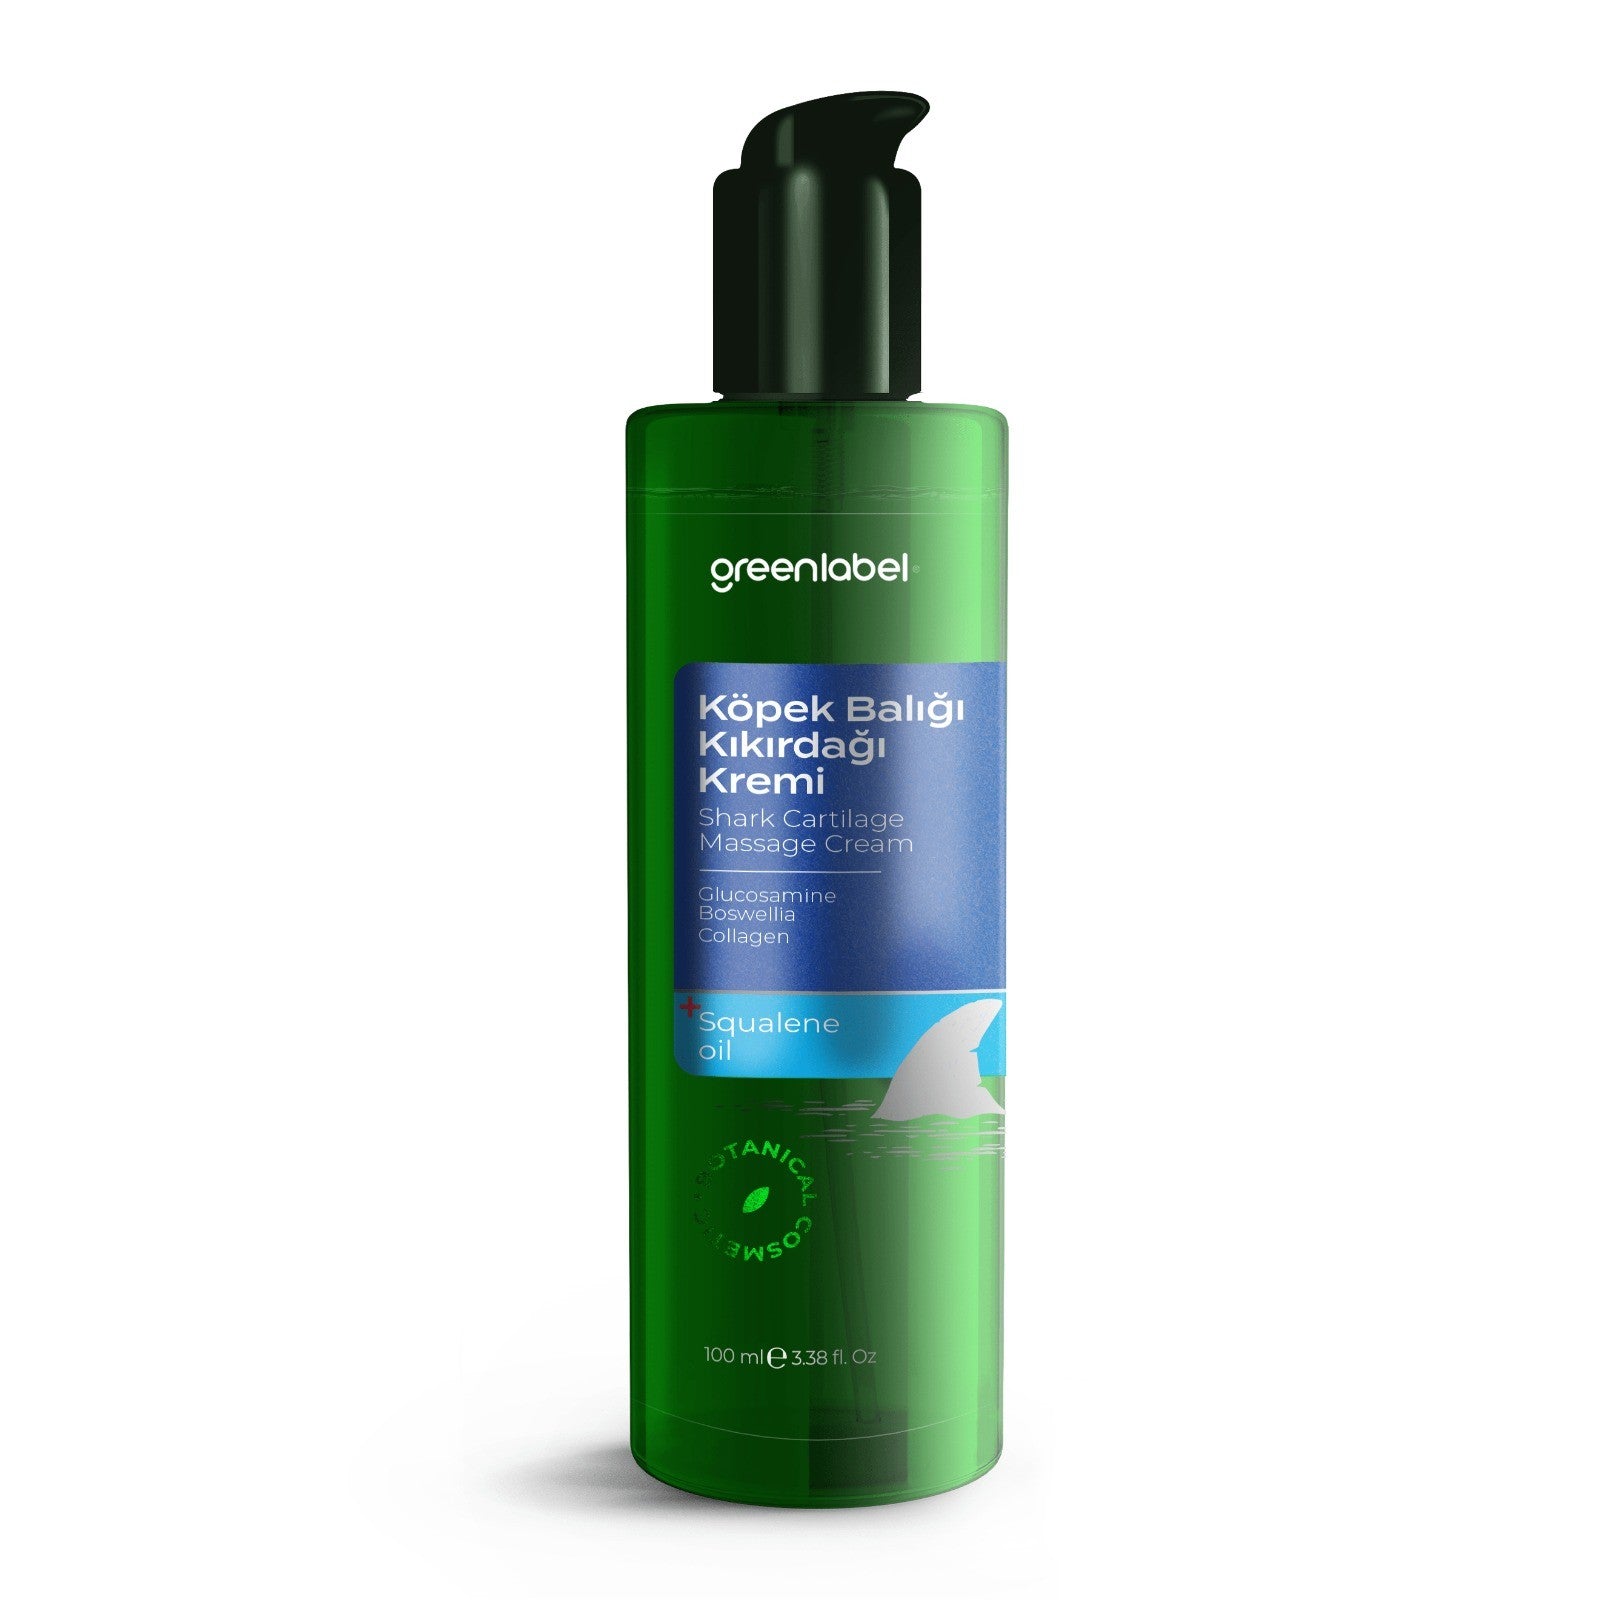 Shark Cartilage and Glucosamine and Msm Body Gel 200ML